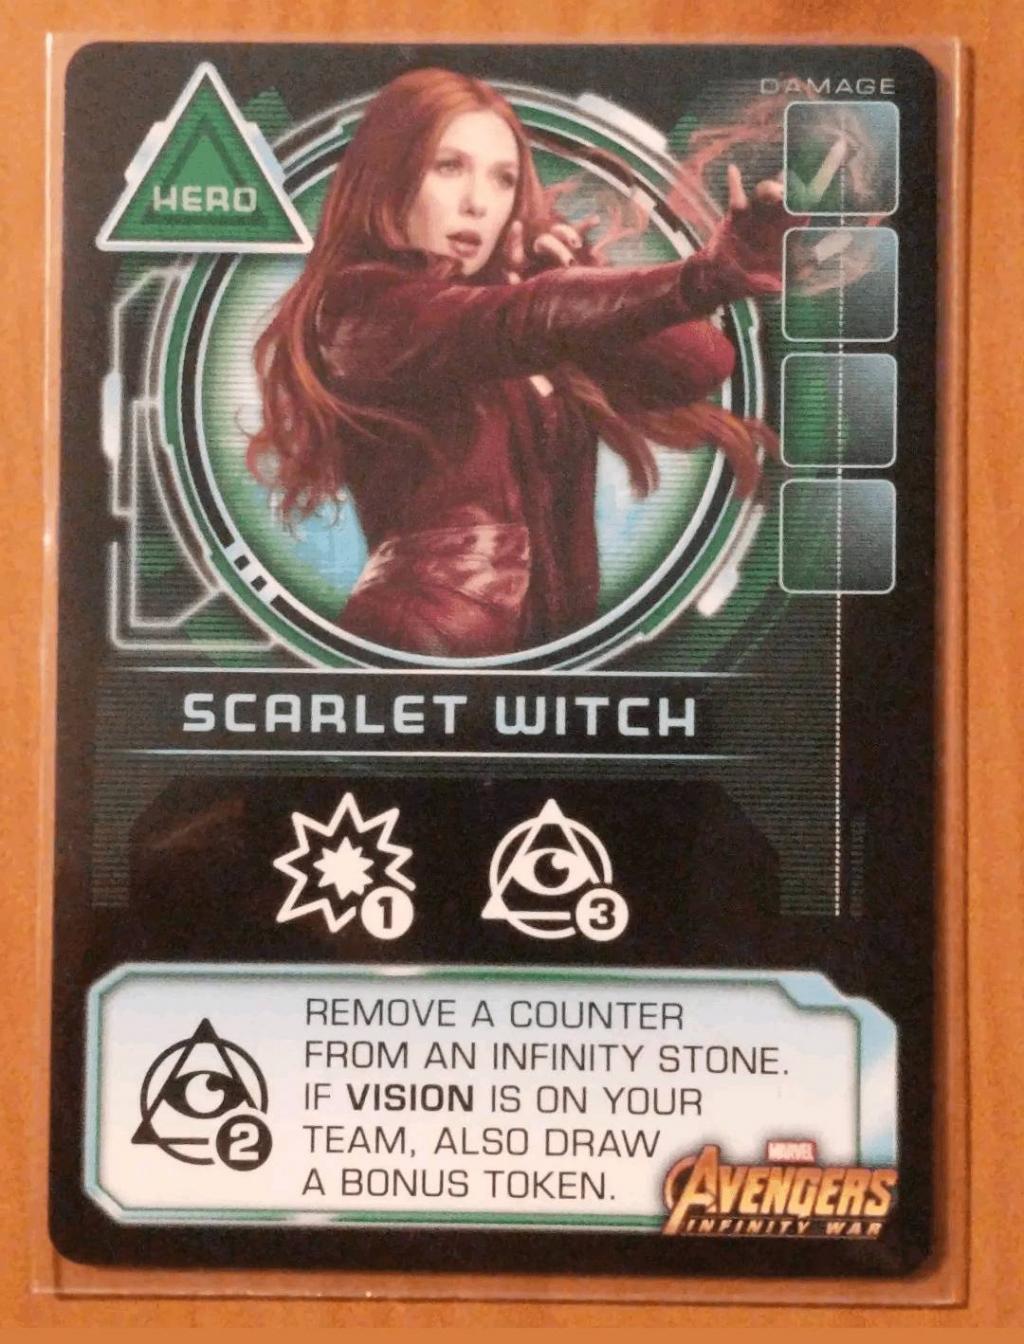 Thanos Rising: Avengers Infinity War – Scarlet Witch Promo Card